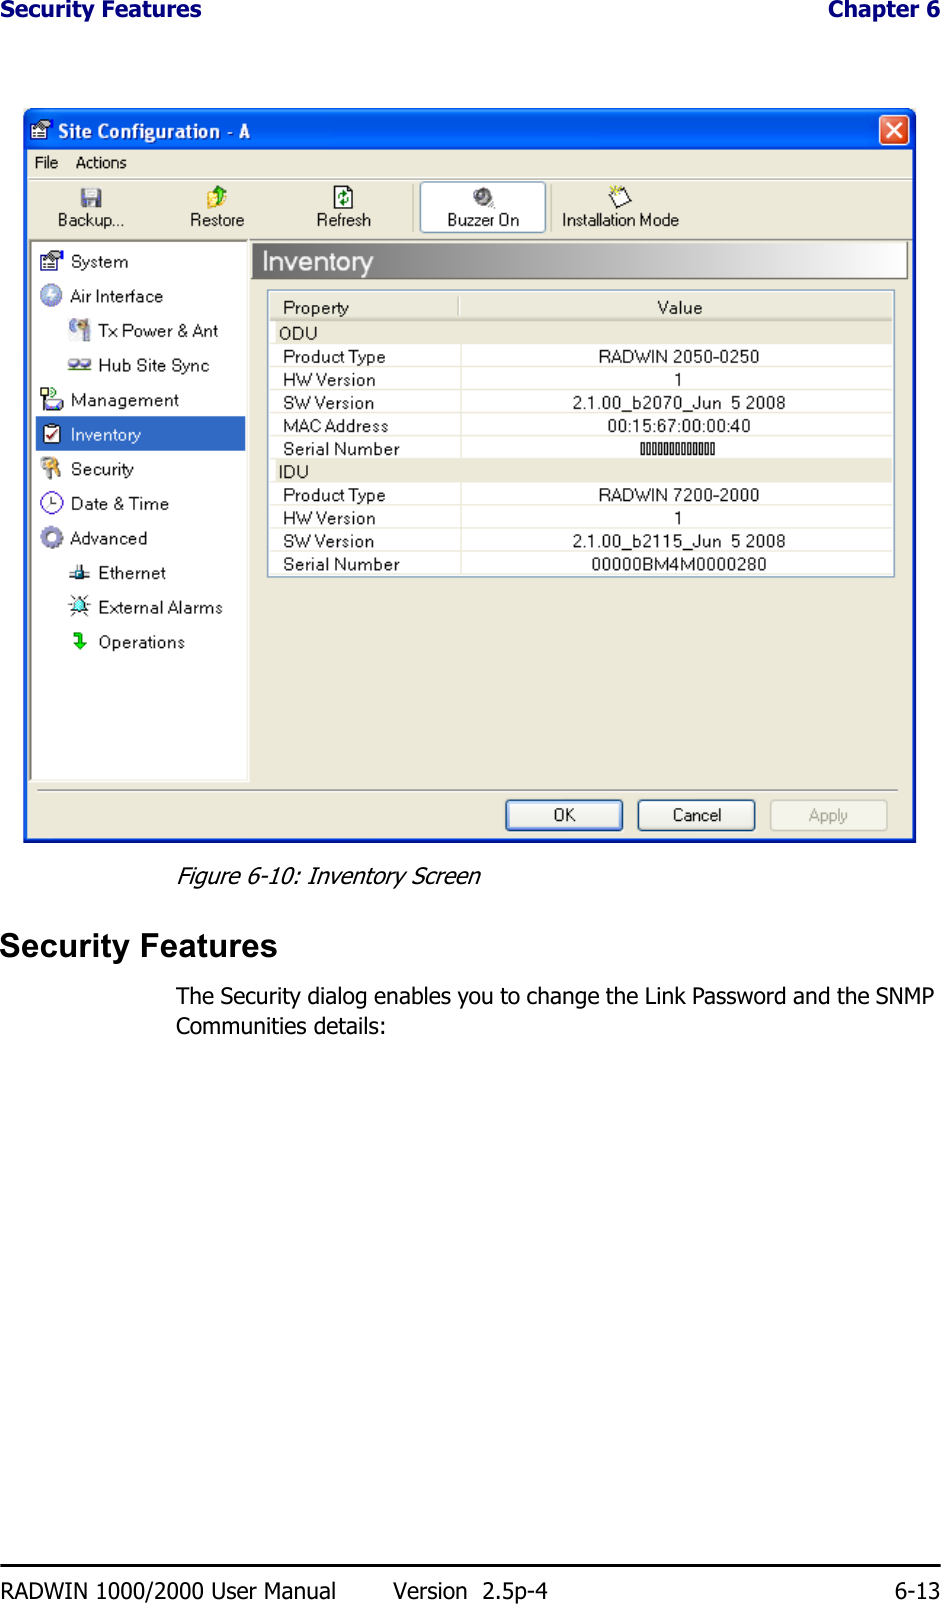 Security Features  Chapter 6RADWIN 1000/2000 User Manual Version  2.5p-4 6-13Figure 6-10: Inventory ScreenSecurity FeaturesThe Security dialog enables you to change the Link Password and the SNMP Communities details: